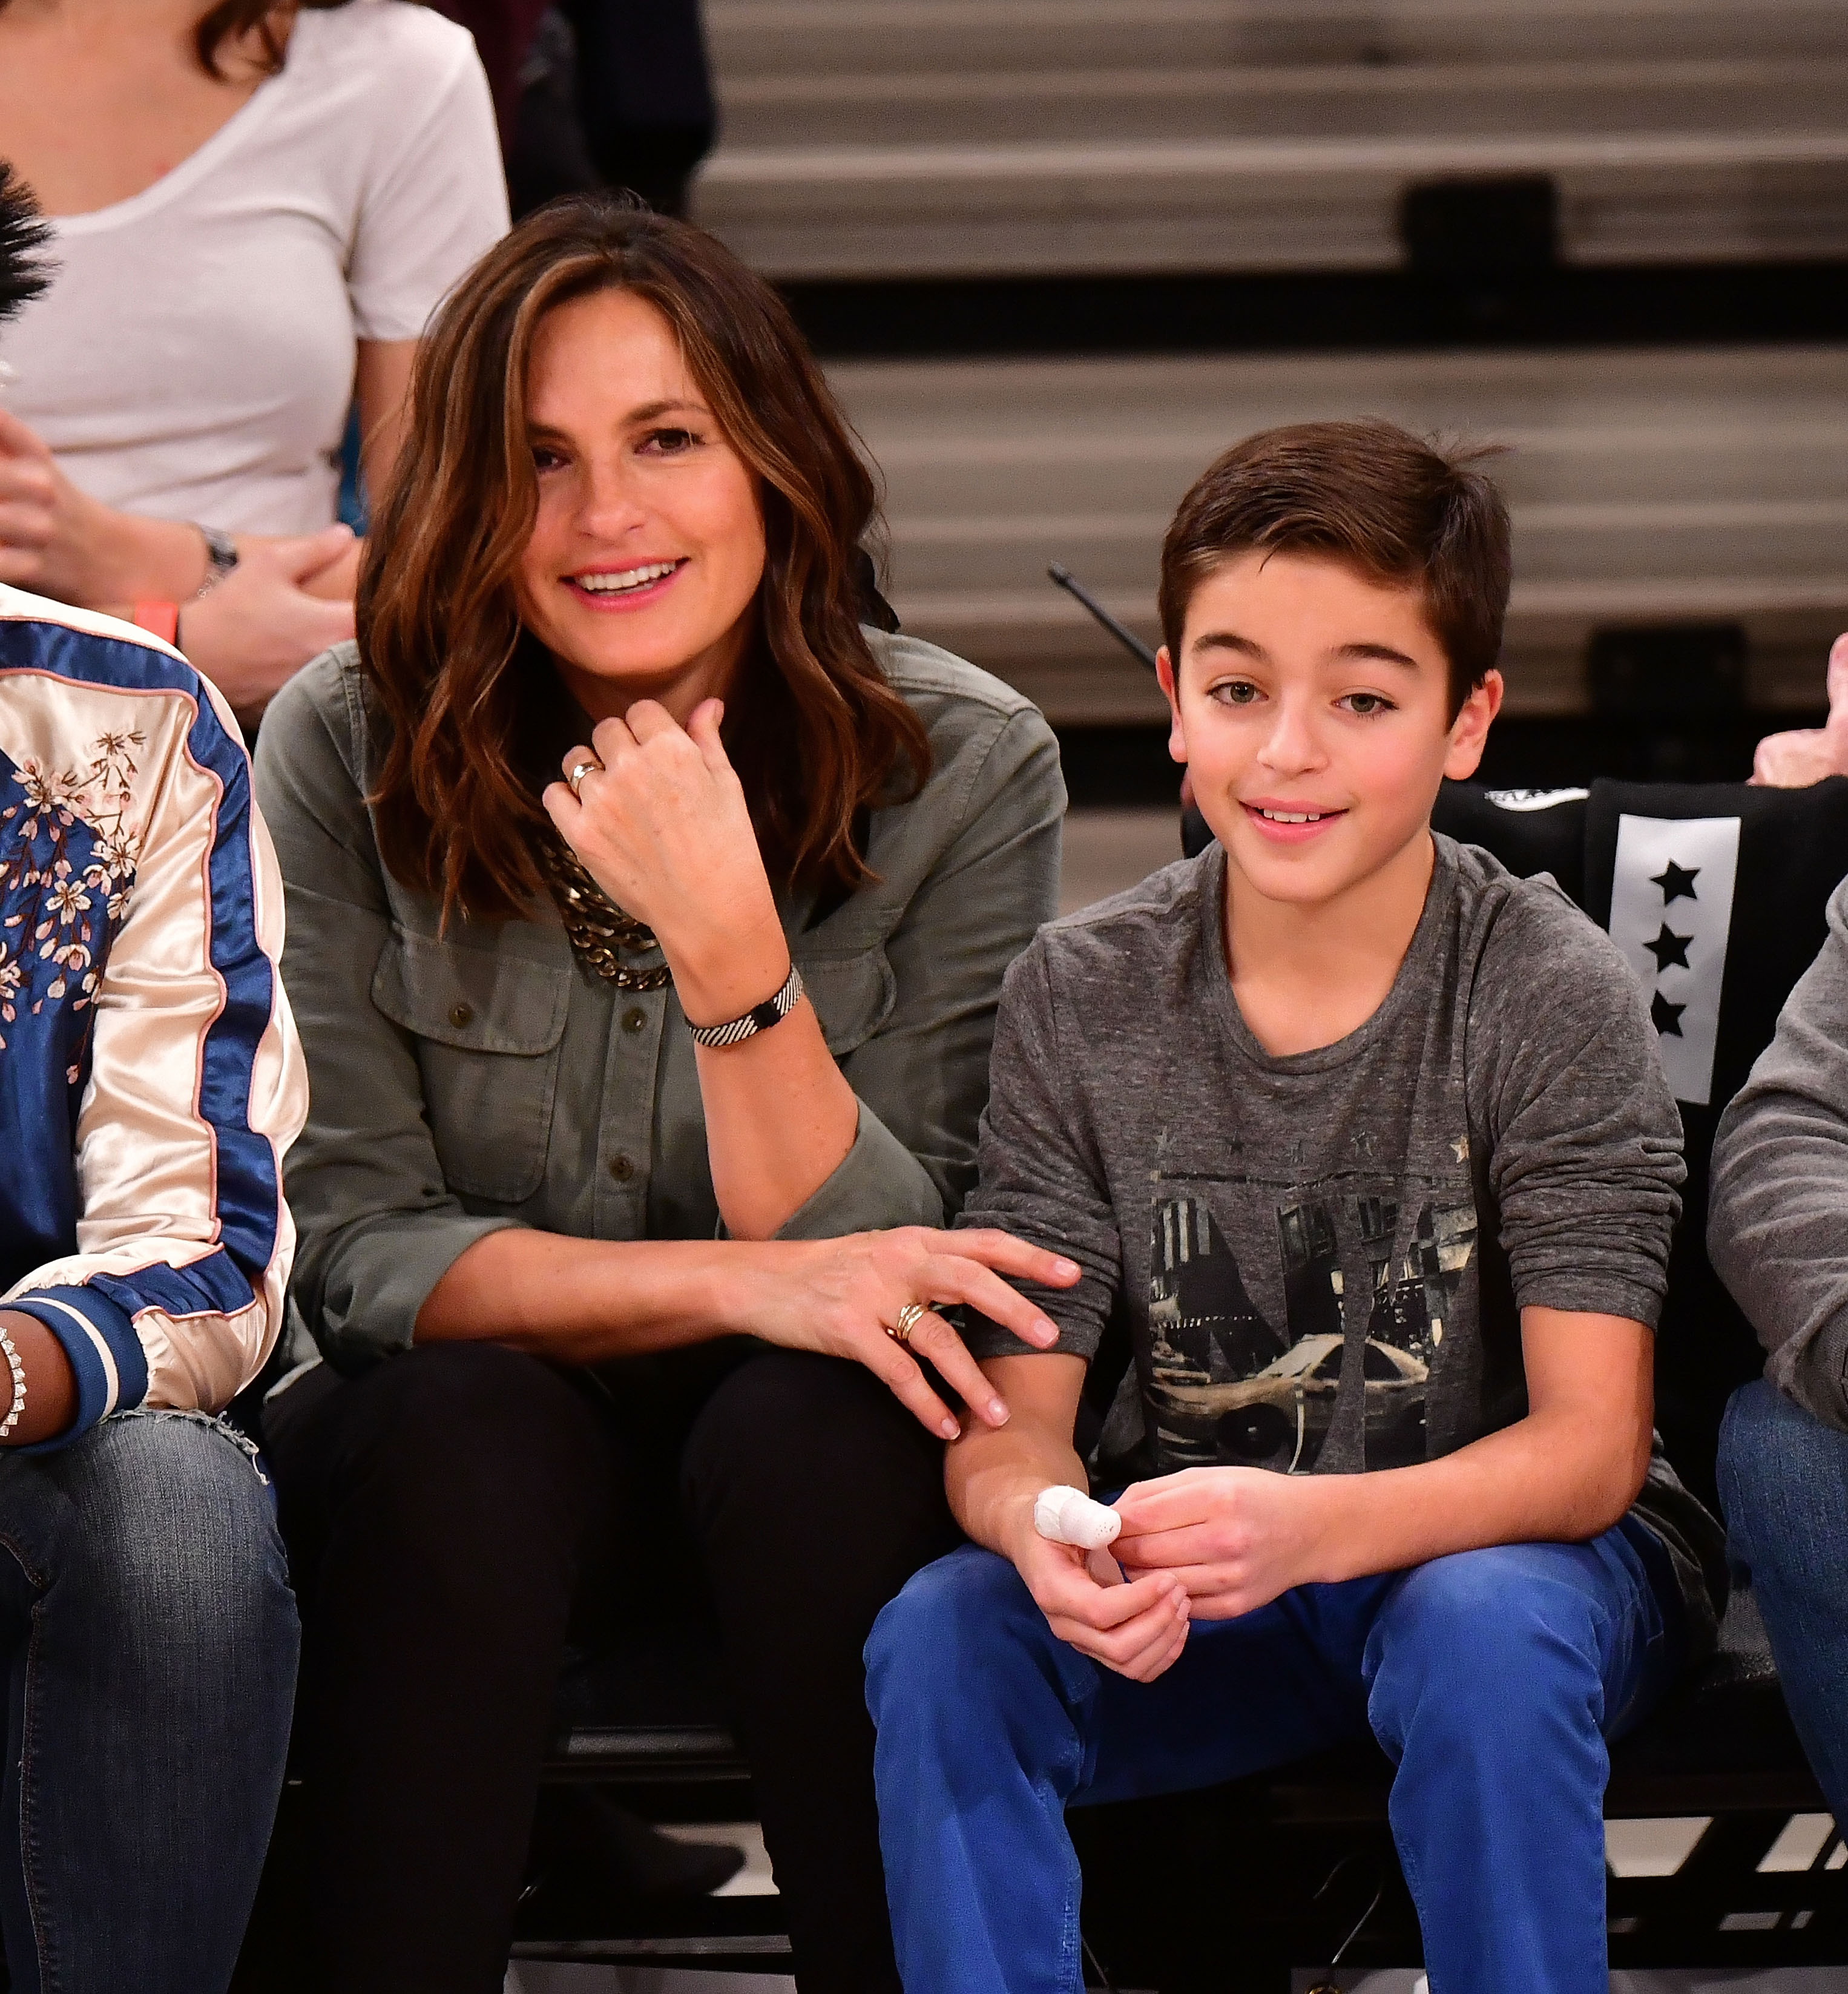 Mariska Hargitay and her son, August Miklos Friedrich Hermann at the Cleveland Cavaliers Vs. New York Knicks game on November 13, 2017, in New York | Photo: Getty Images